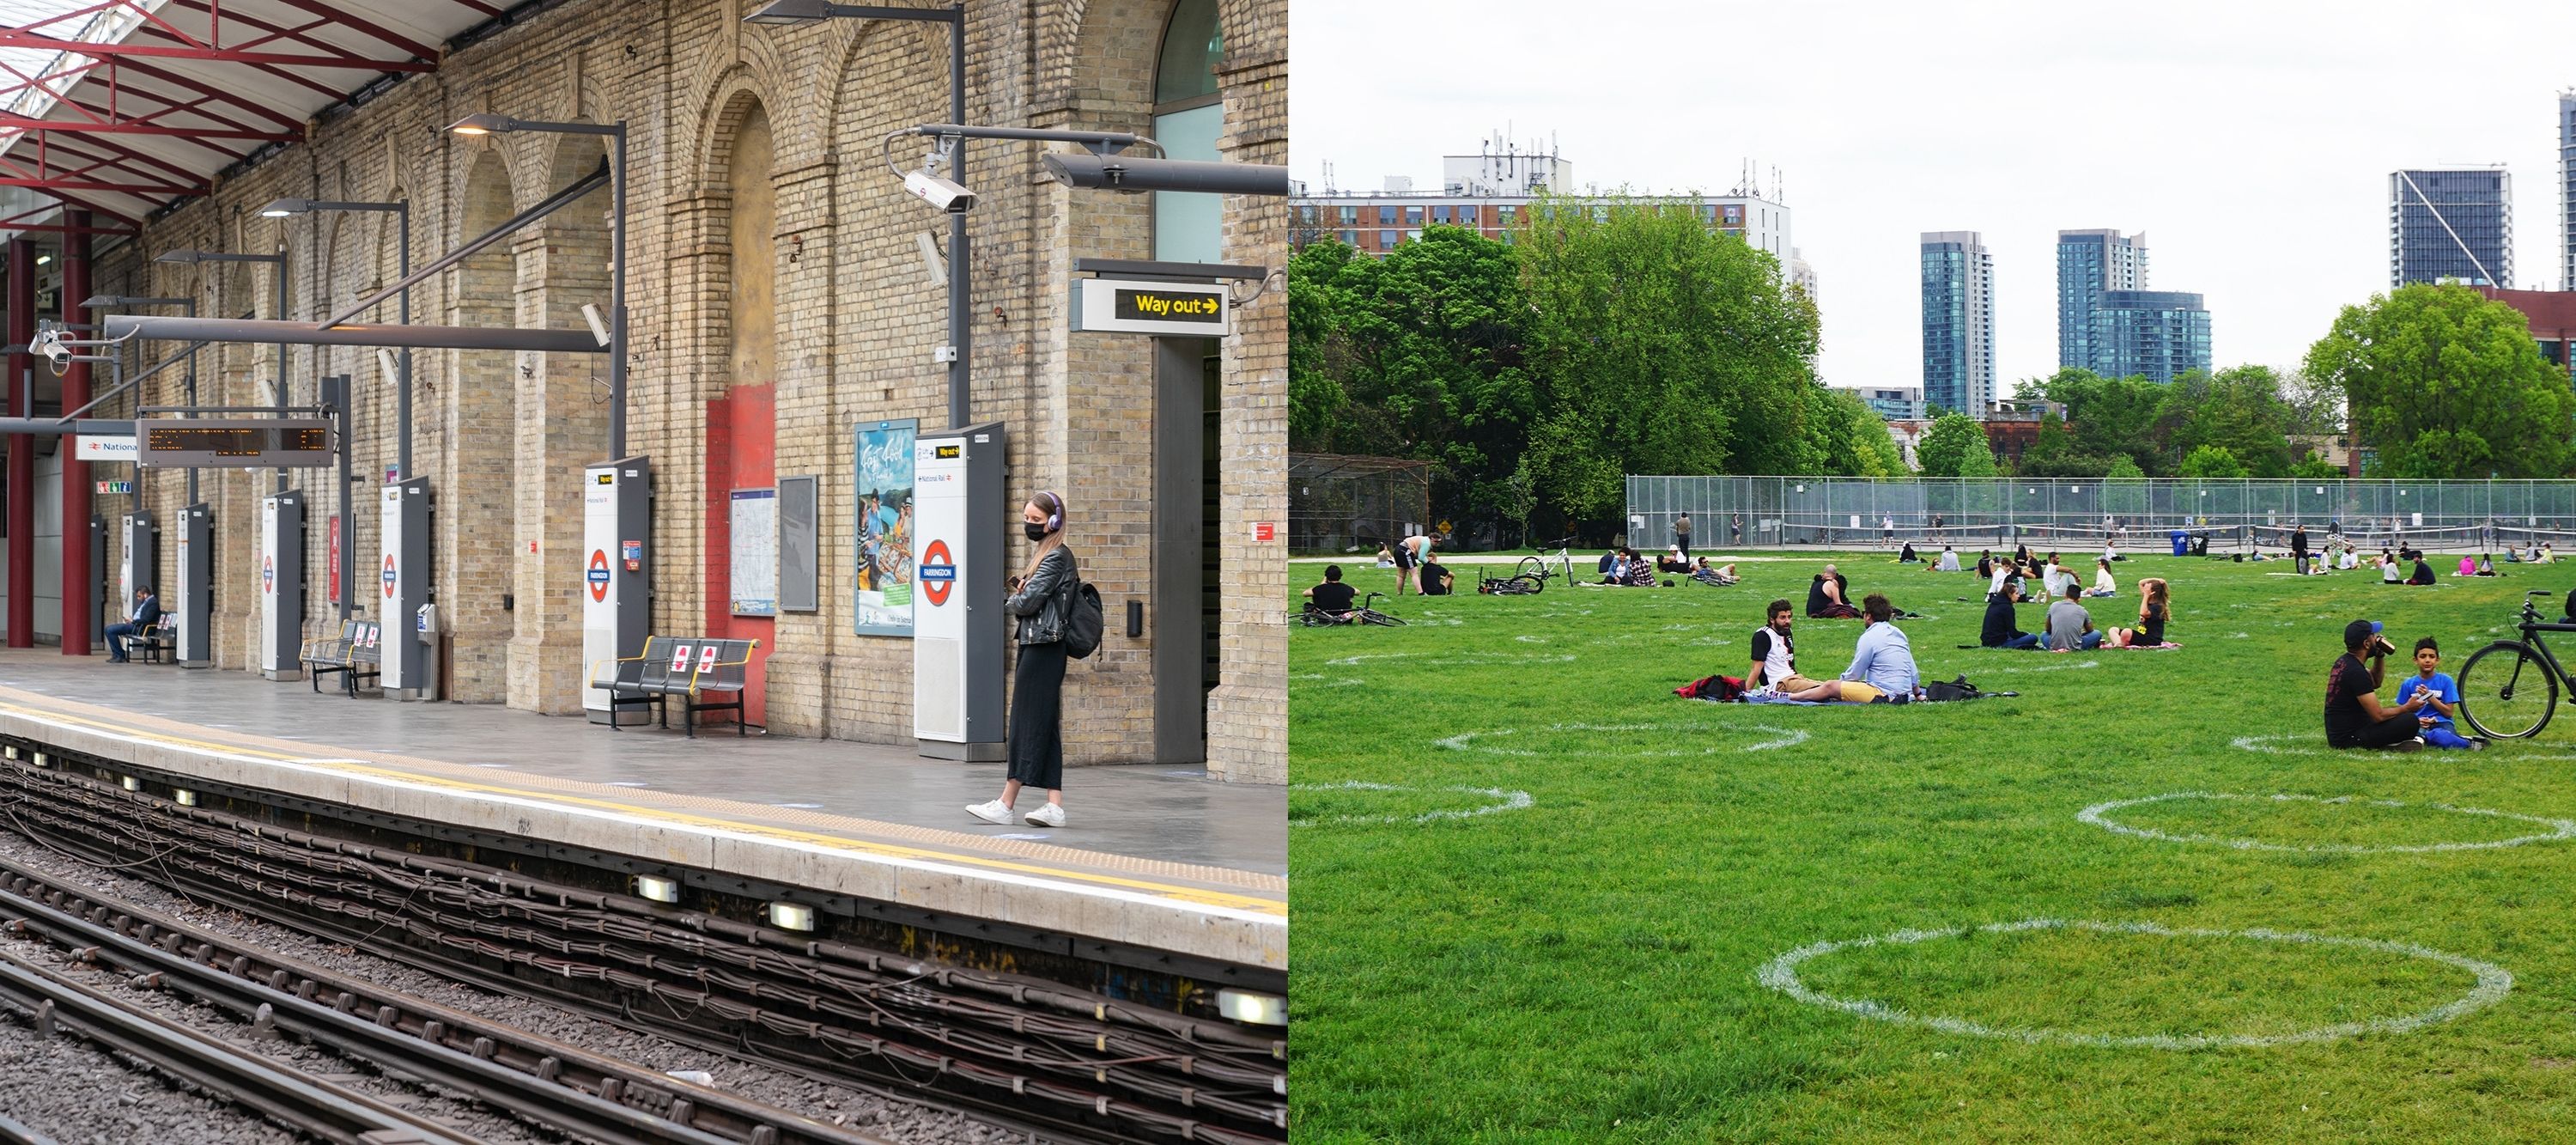 At left, a person wearing a face mask waits on the platform for the London Underground. At right. people sitting in a park on circles drawn in the grass to observe social distancing guidelines.